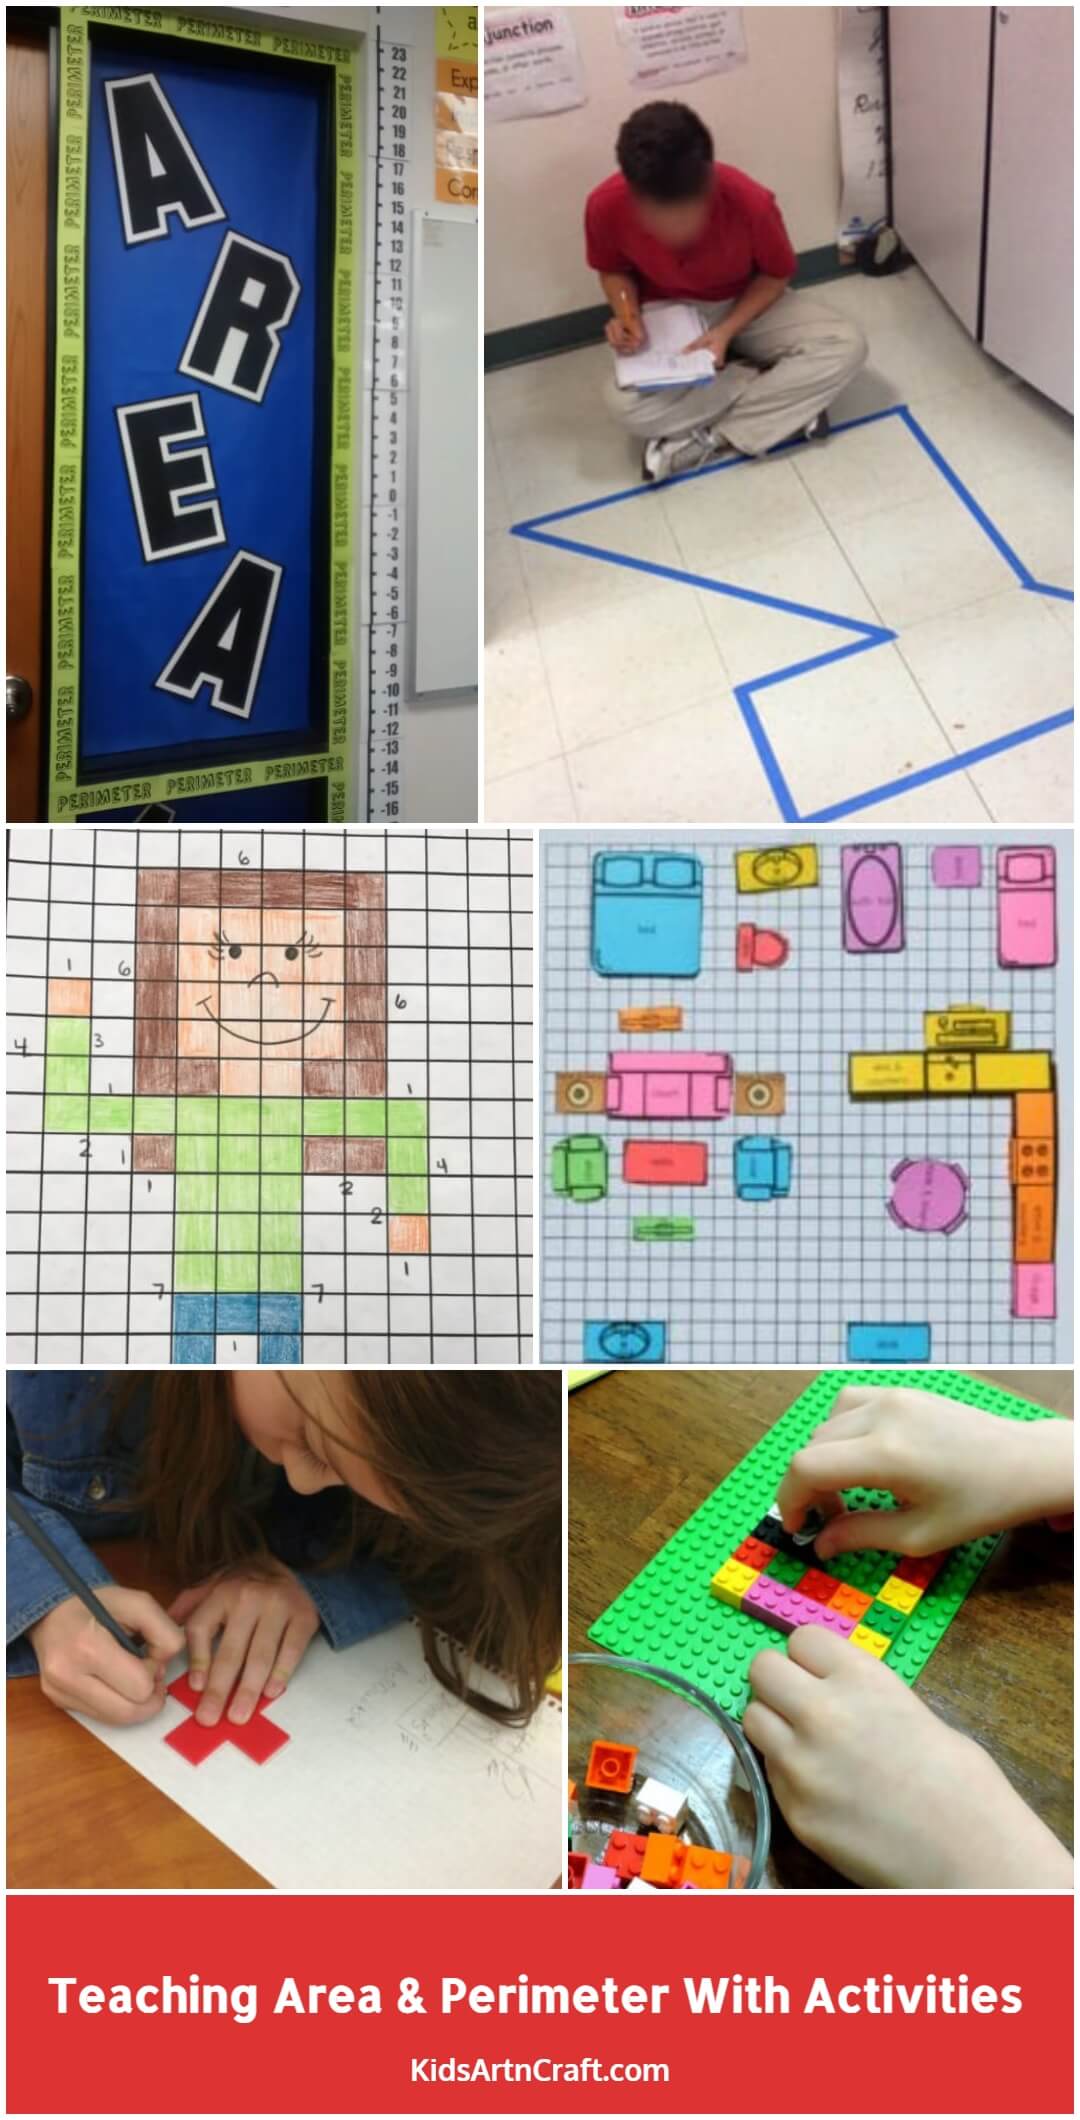 How to Teach Area and Perimeter with Activities